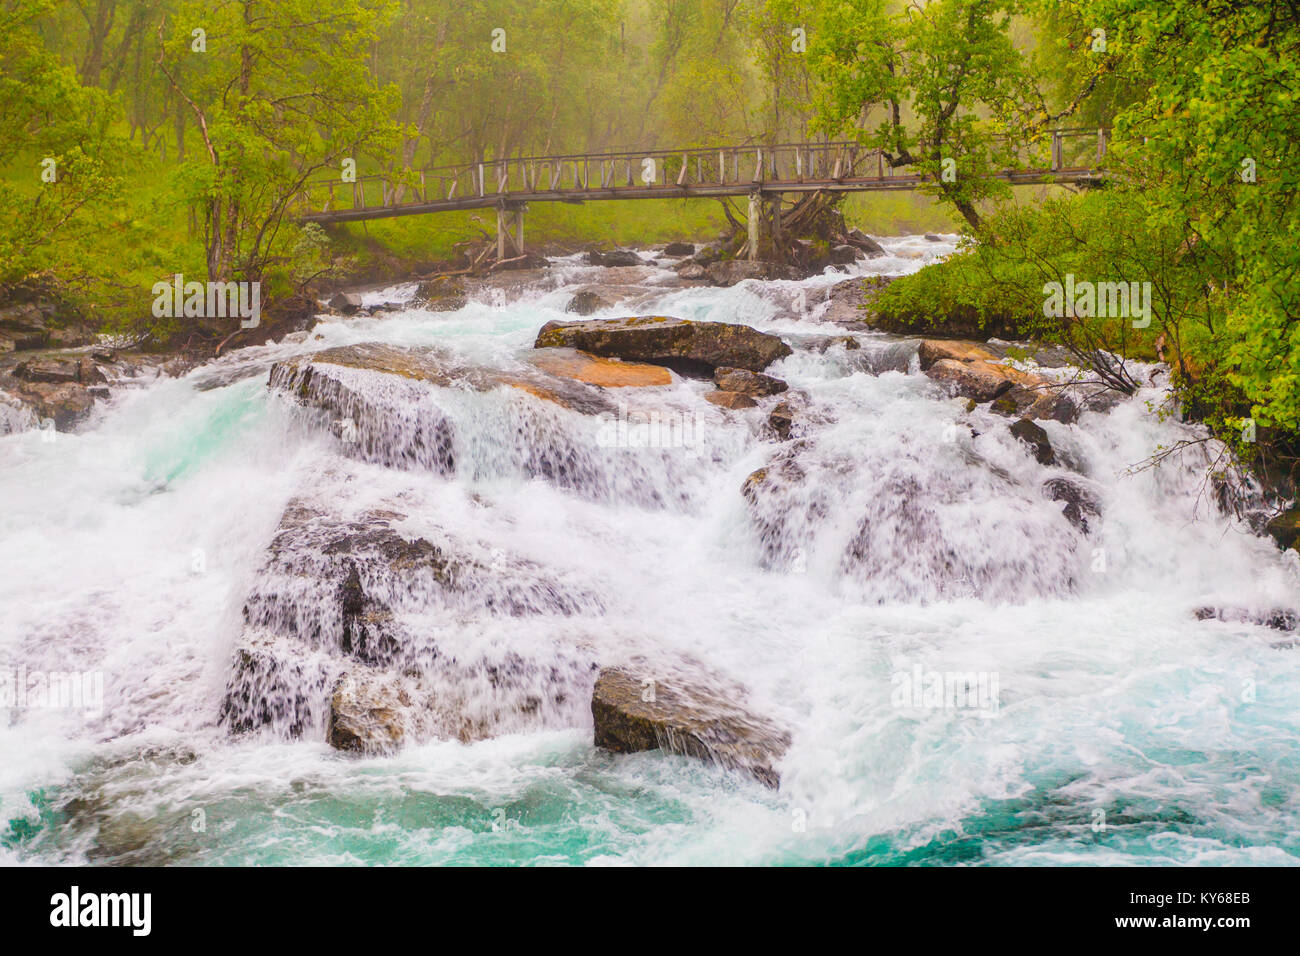 Travel, beauty in nature. Small bridge and waterfall torrential river along the Aurlandsfjellet mountains in Norway Sogn og Fjordane, foggy hazy summe Stock Photo